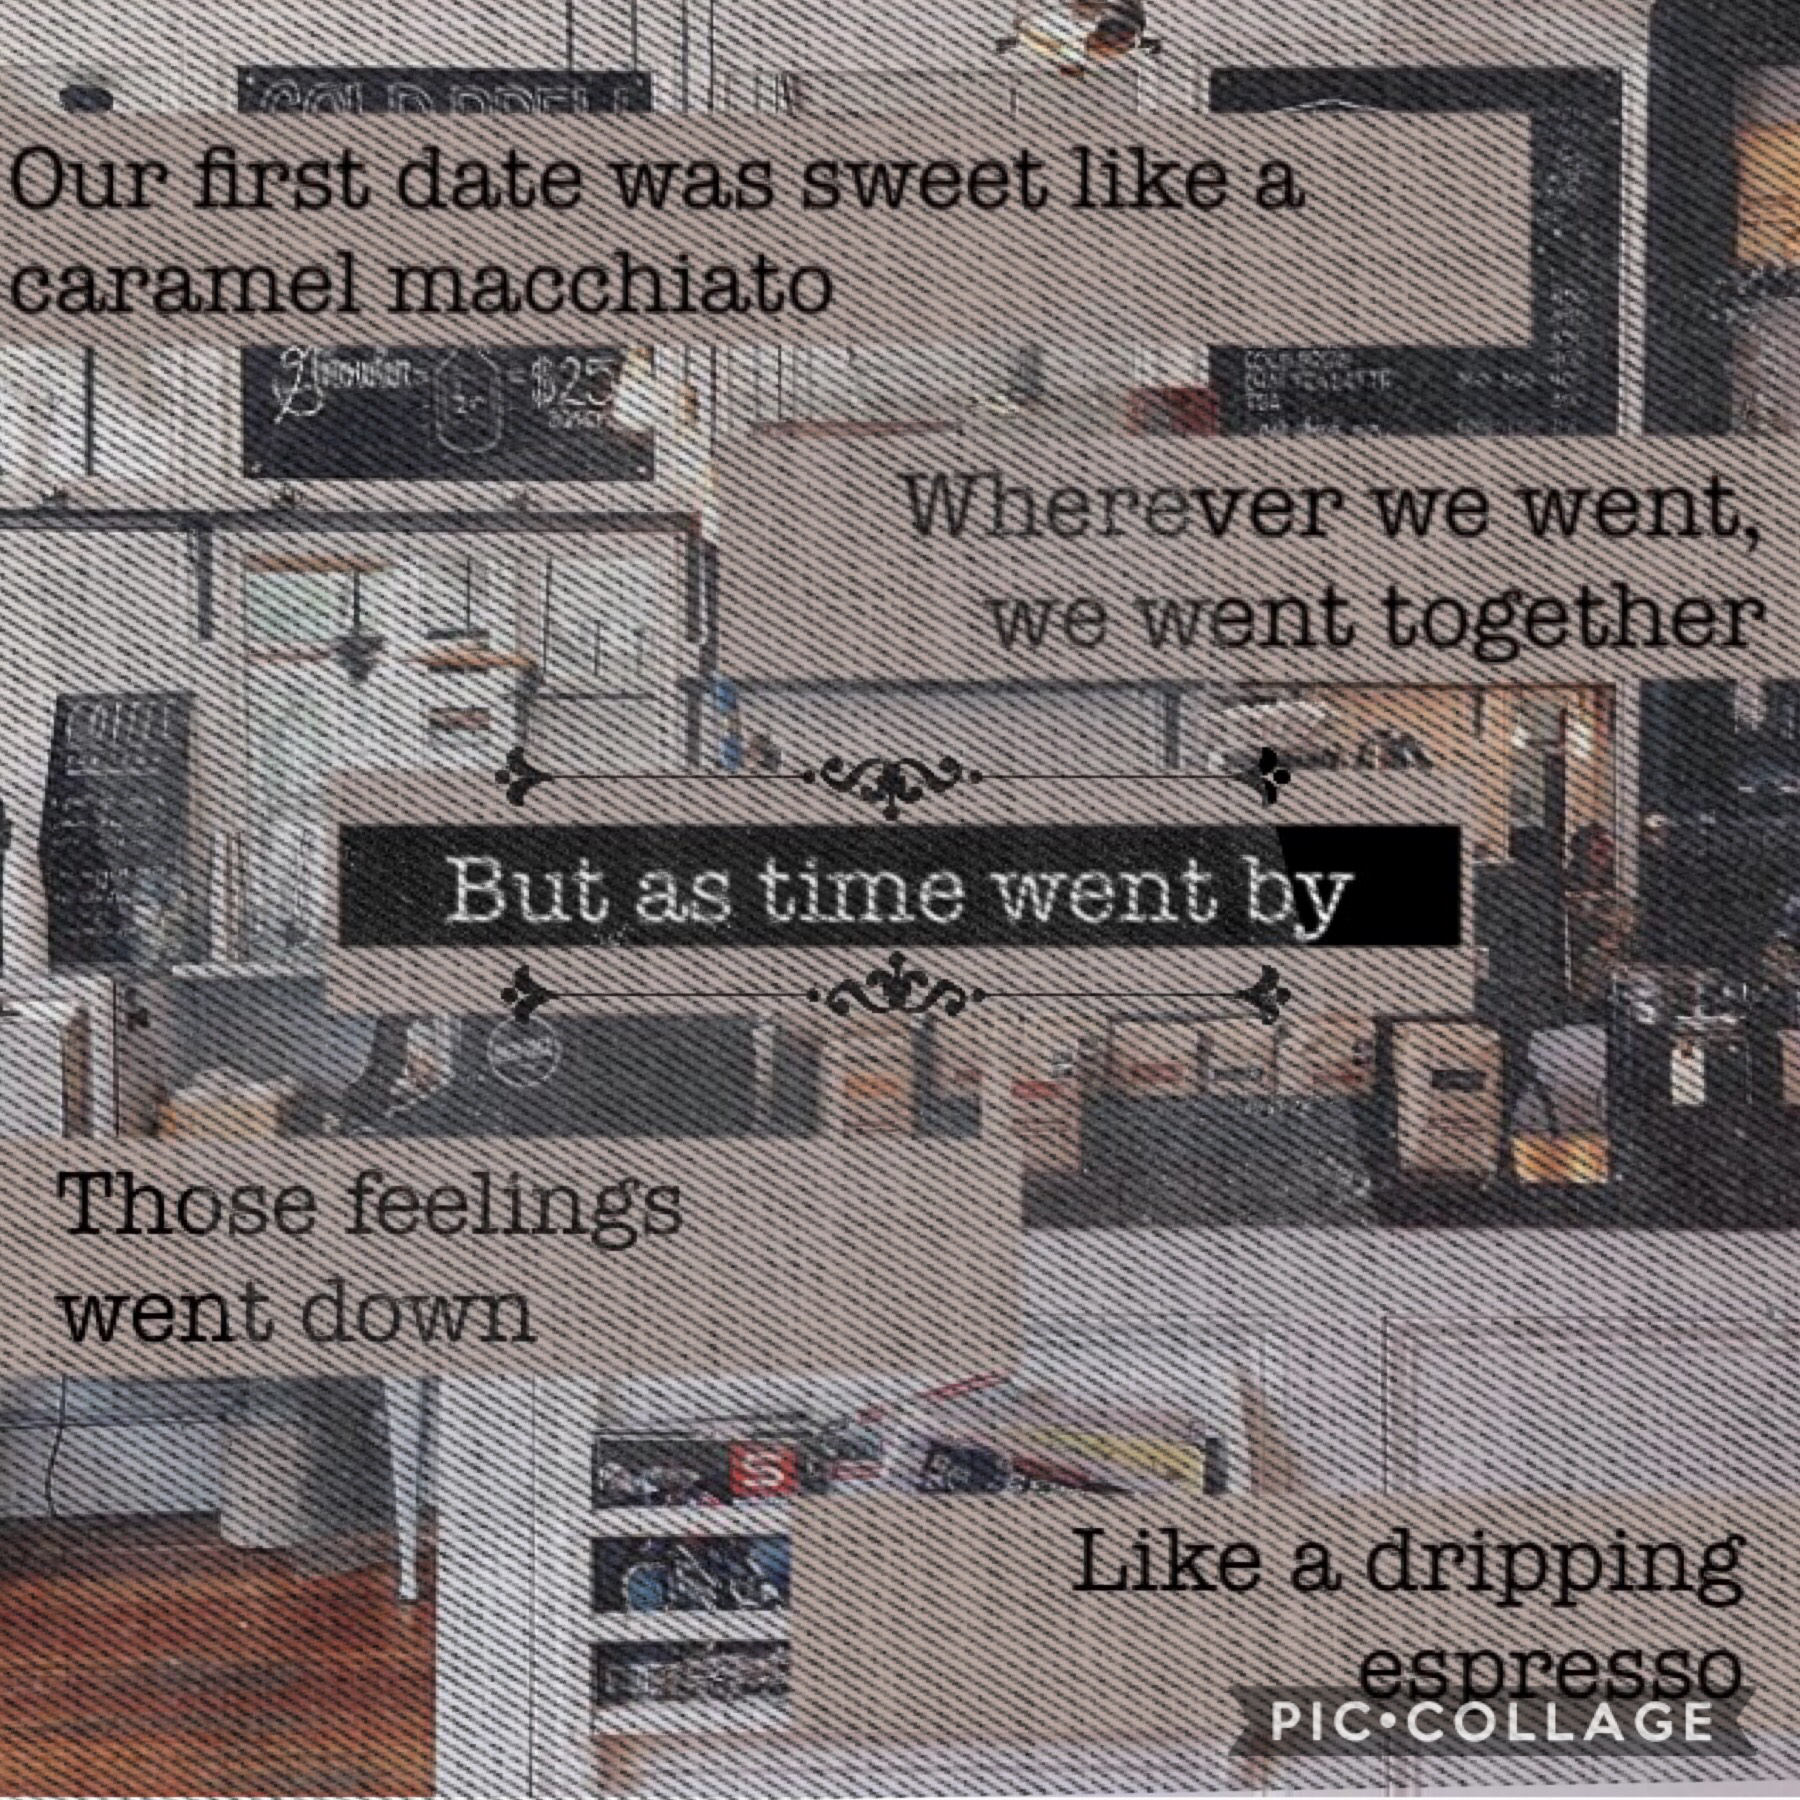 This is another contest entry lol

it’s some lyrics from coffee ☕️ by bts (I tweaked them a little bit from what I found online but yeah pretty much) it’s kinda bland but oh well!